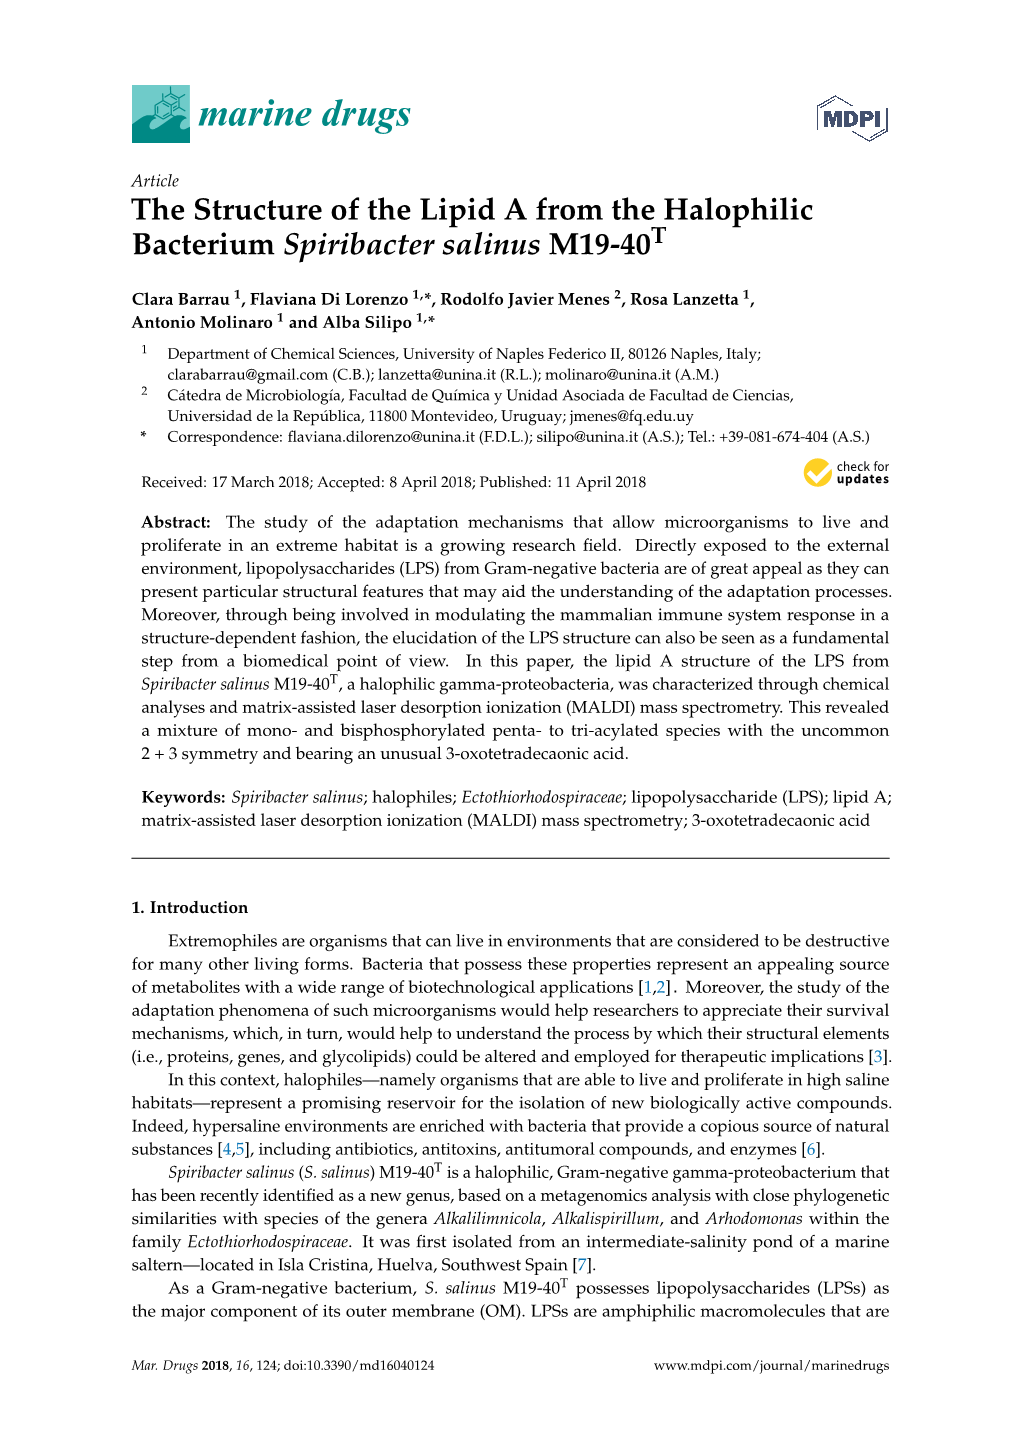 The Structure of the Lipid a from the Halophilic Bacterium Spiribacter Salinus M19-40T